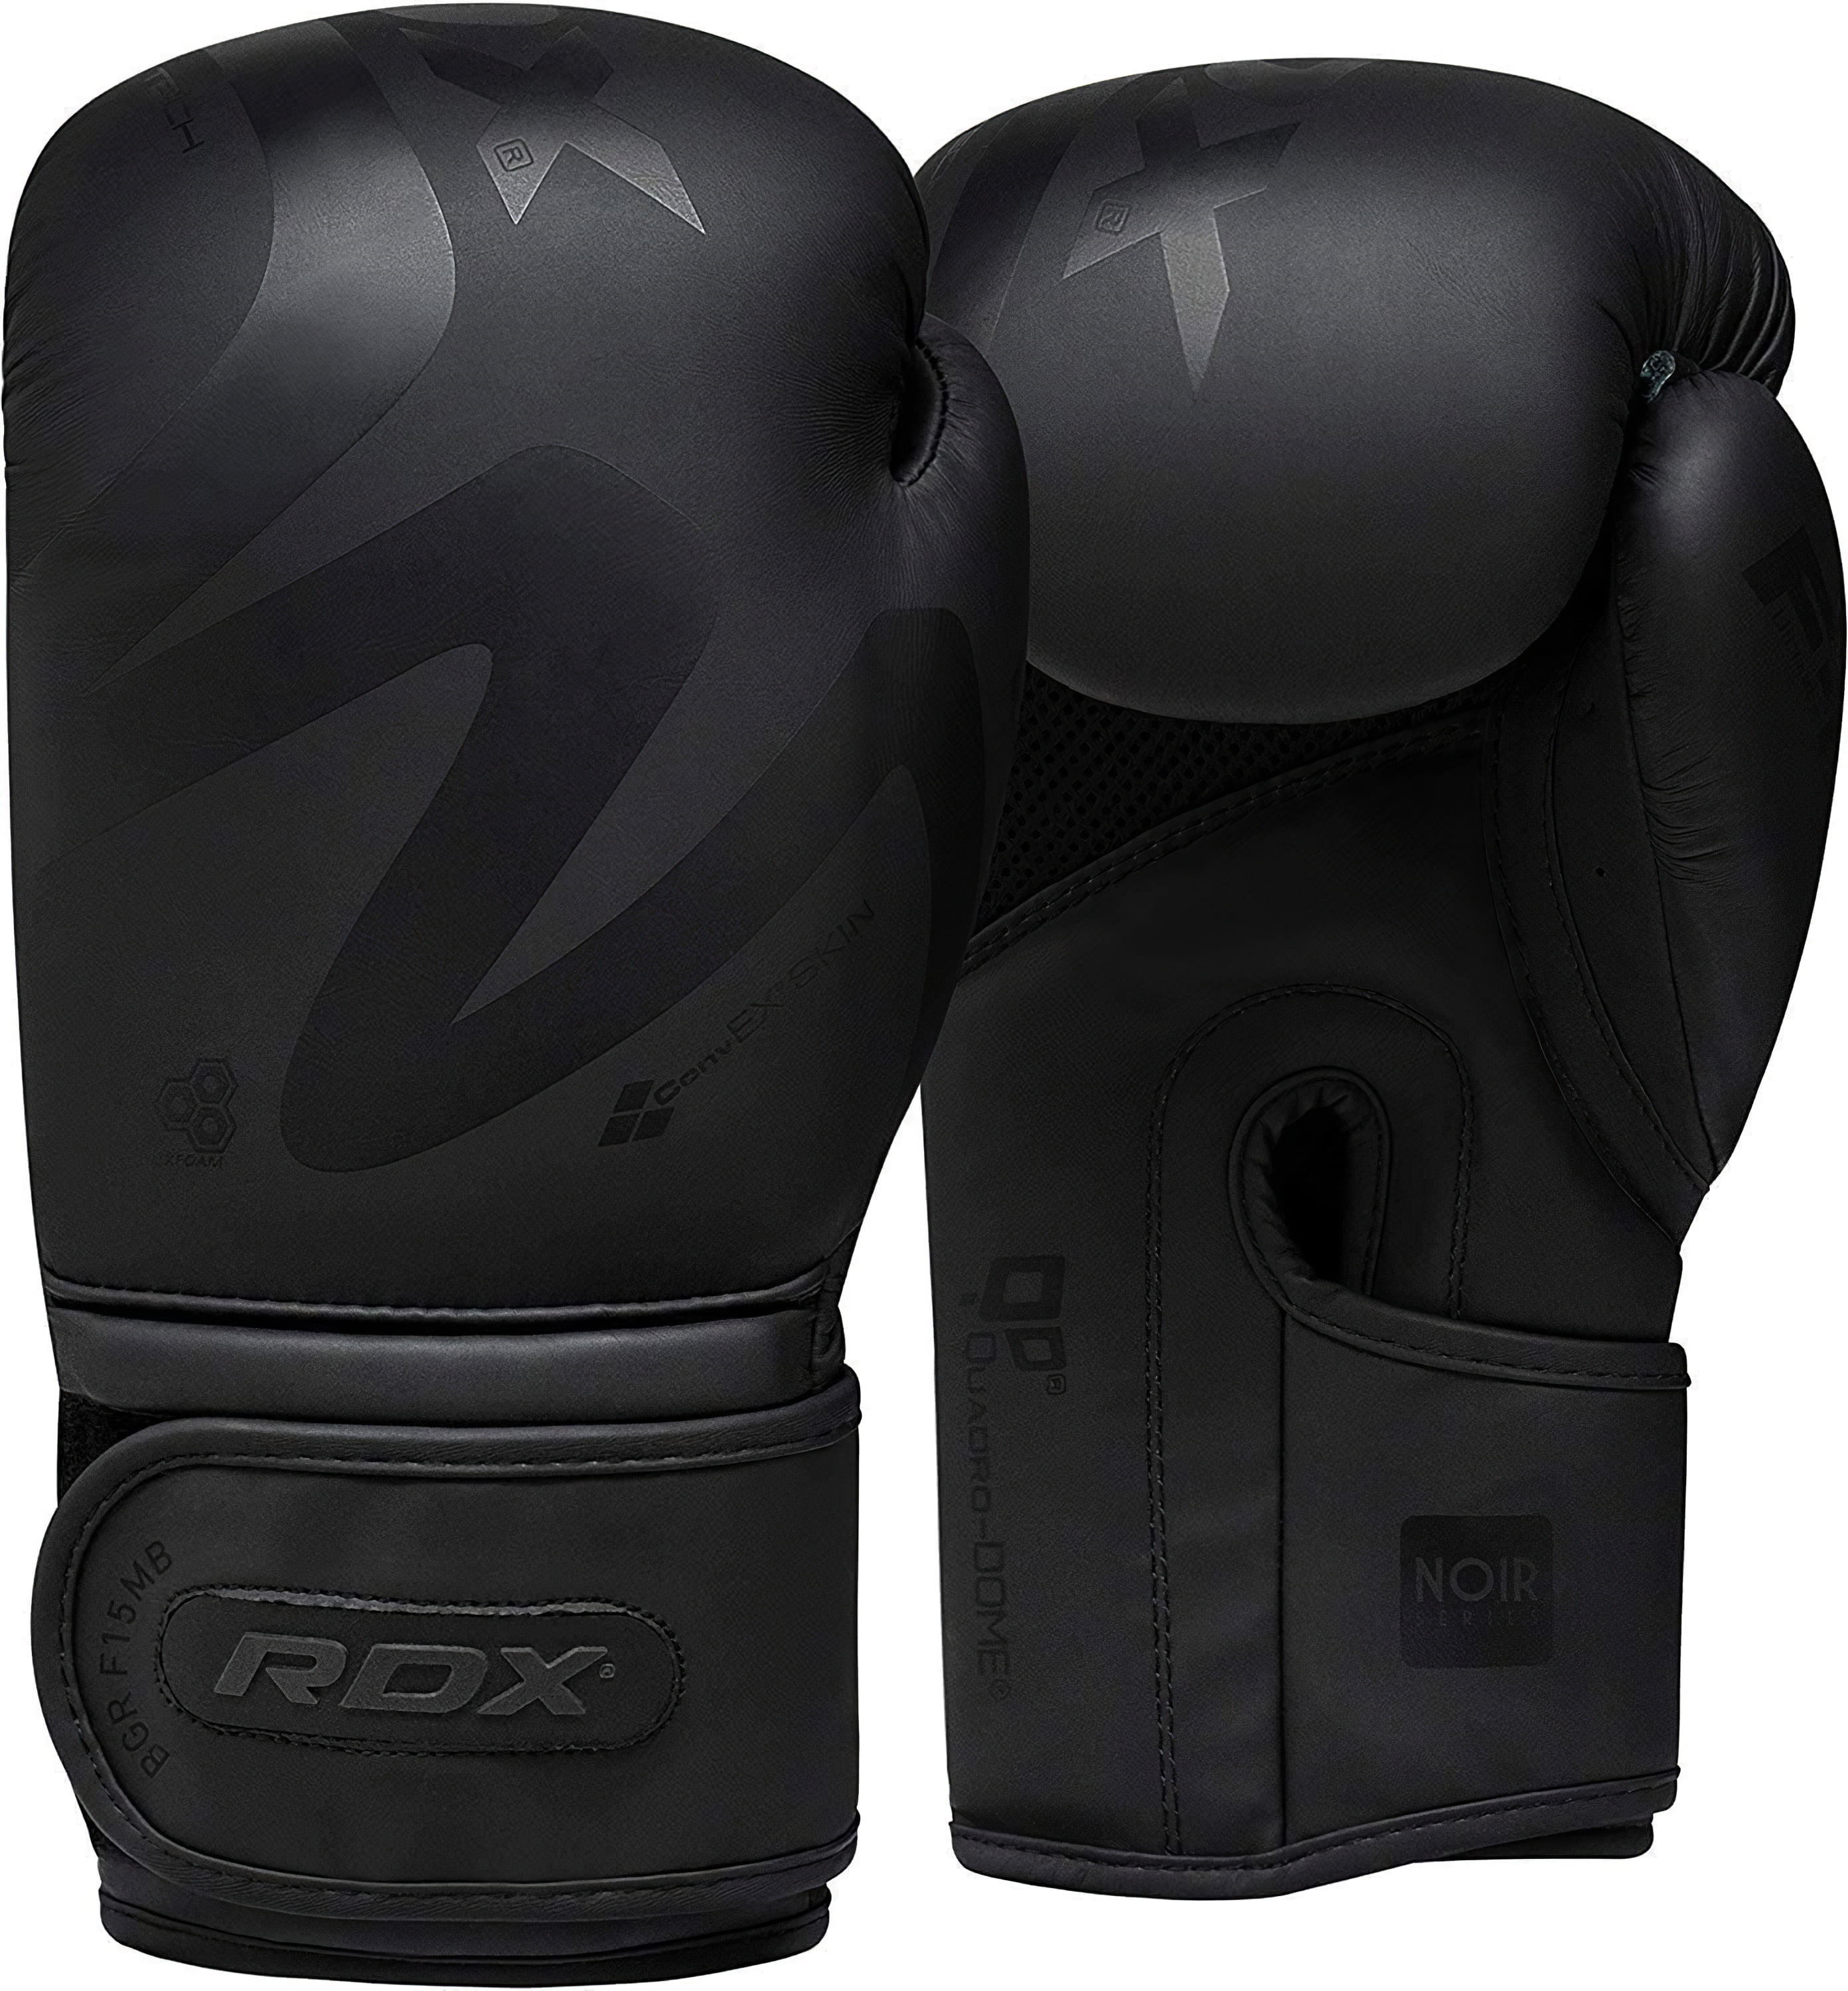 MEISTER 16oz GEL ARMOR TRAINING BOXING GLOVES Leather Title Heavy Bag Mitts 